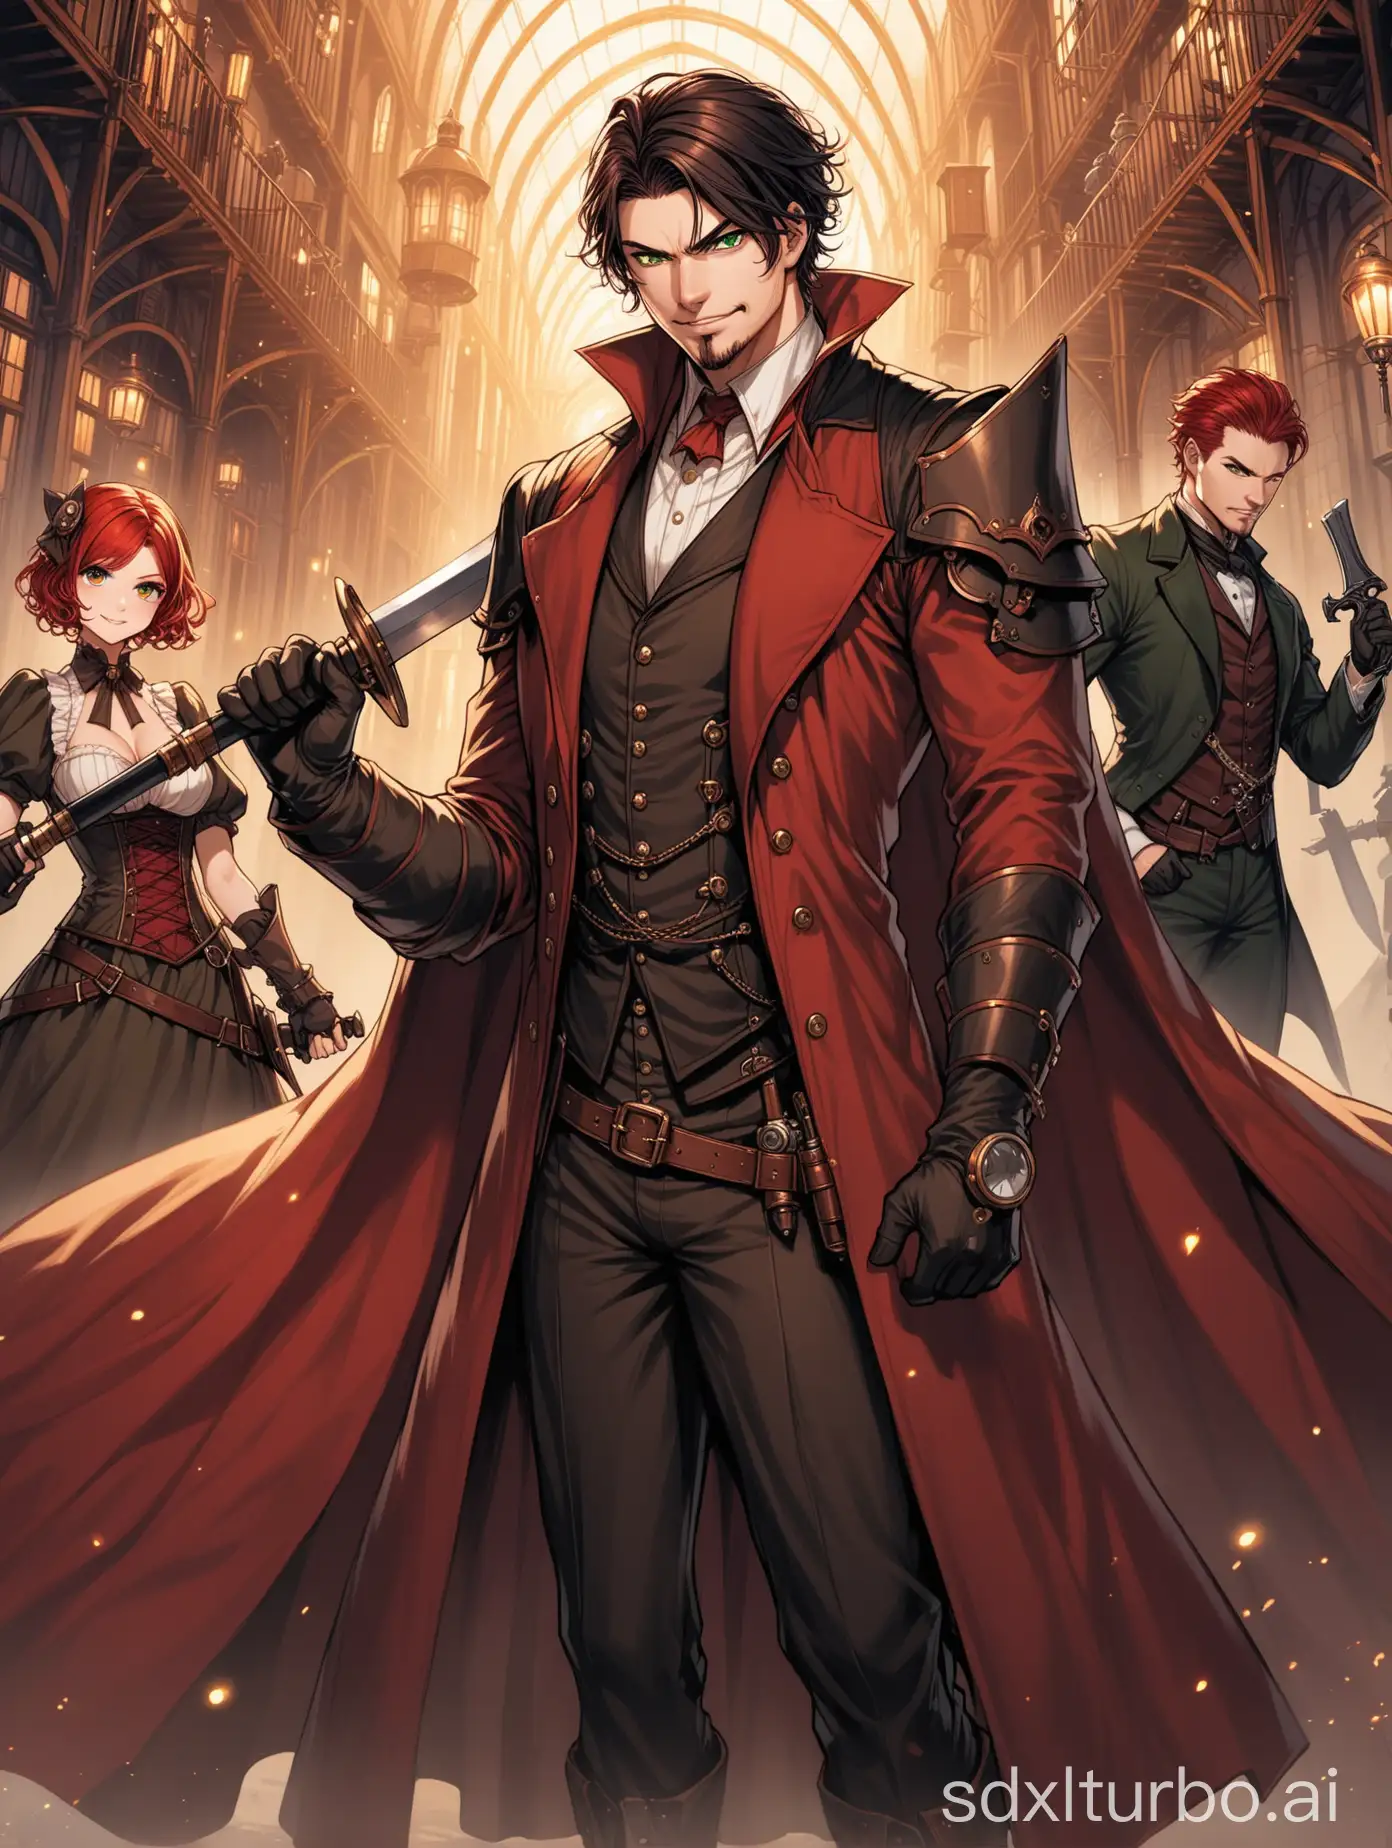 a handsome man, black short straight hair, red color eyes with scar, with dark circles, with intimidating expression, muscular body, with a beige suit, an extravagant executioner's cape, with a smiling psychopath redhead girl, with pixie curly short hair, green eyes, Victorian dress, with an executioner's cape, holding a rare weapon, blood, steampunk